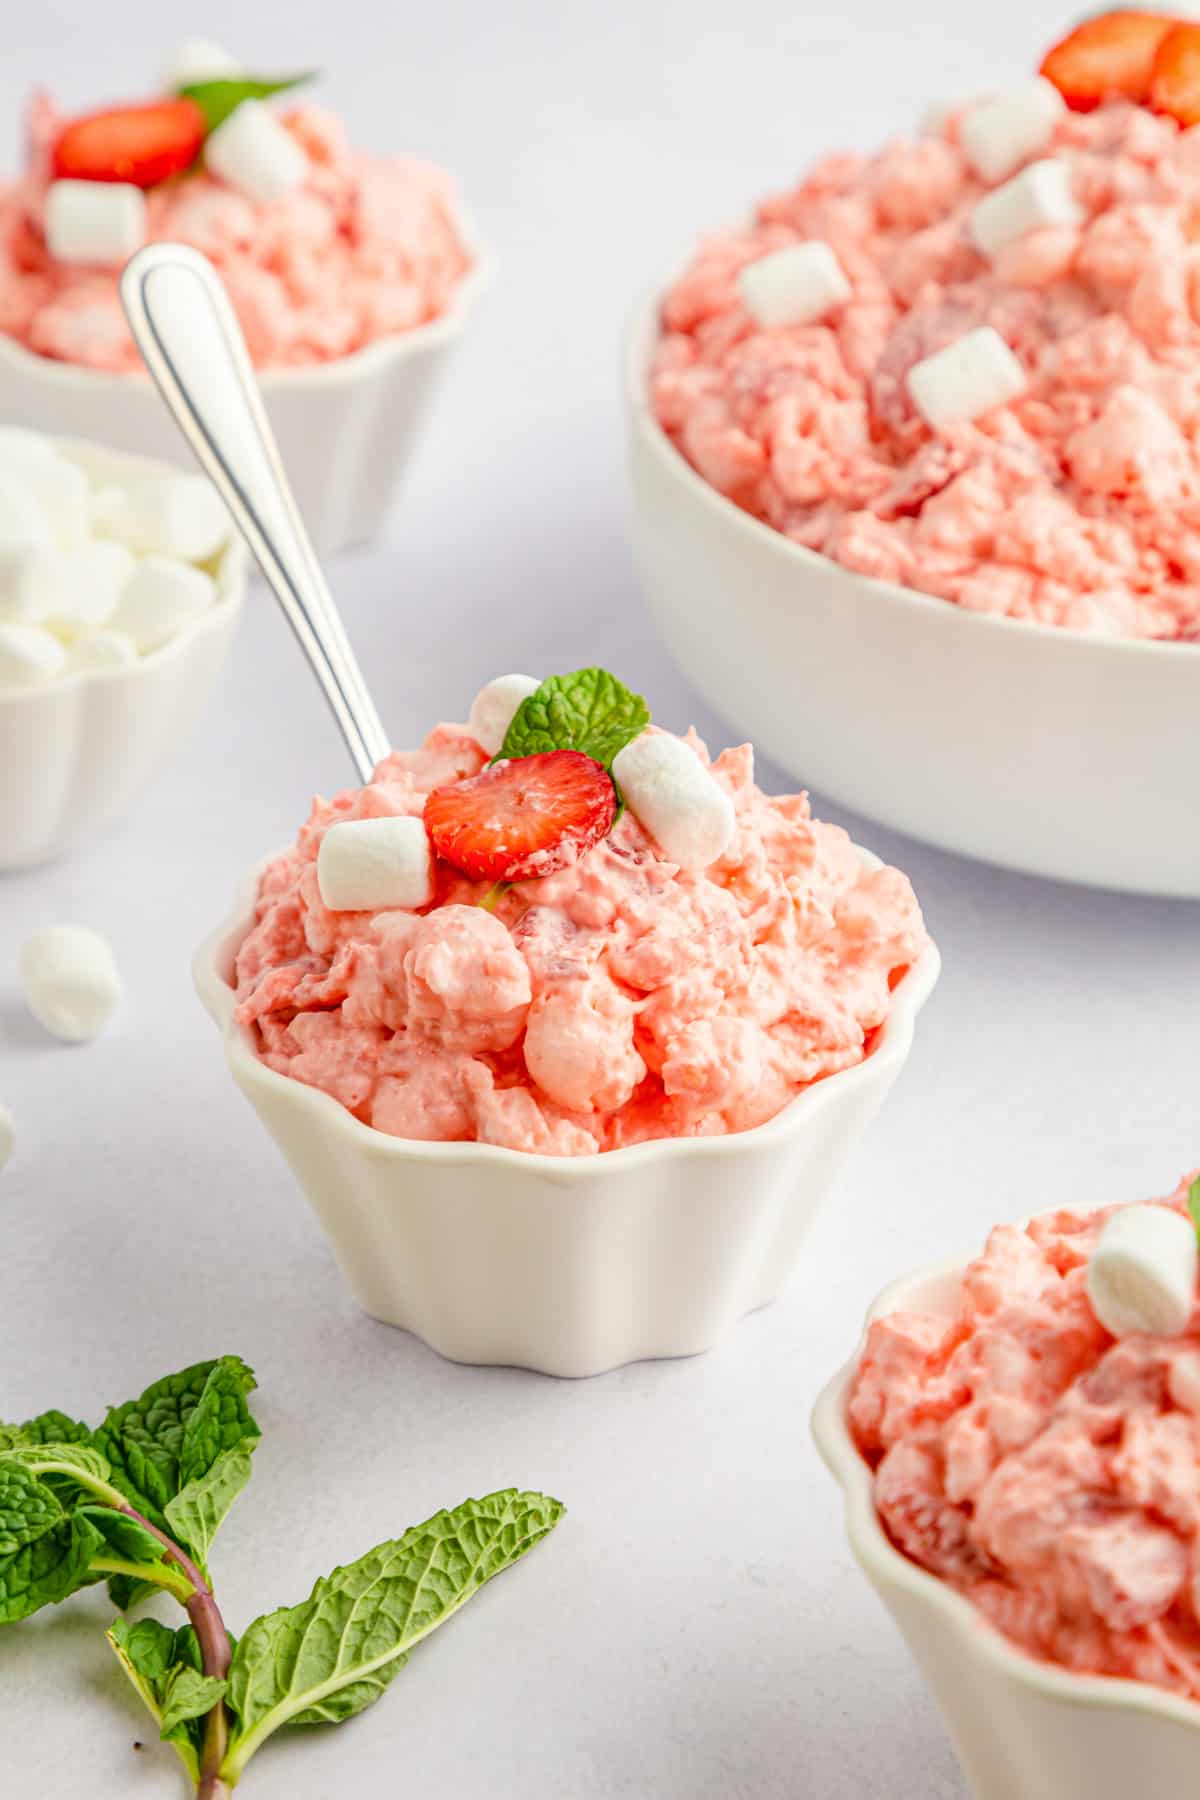 Strawberry marshmallow fluff in a small white bowl with a silver spoon.